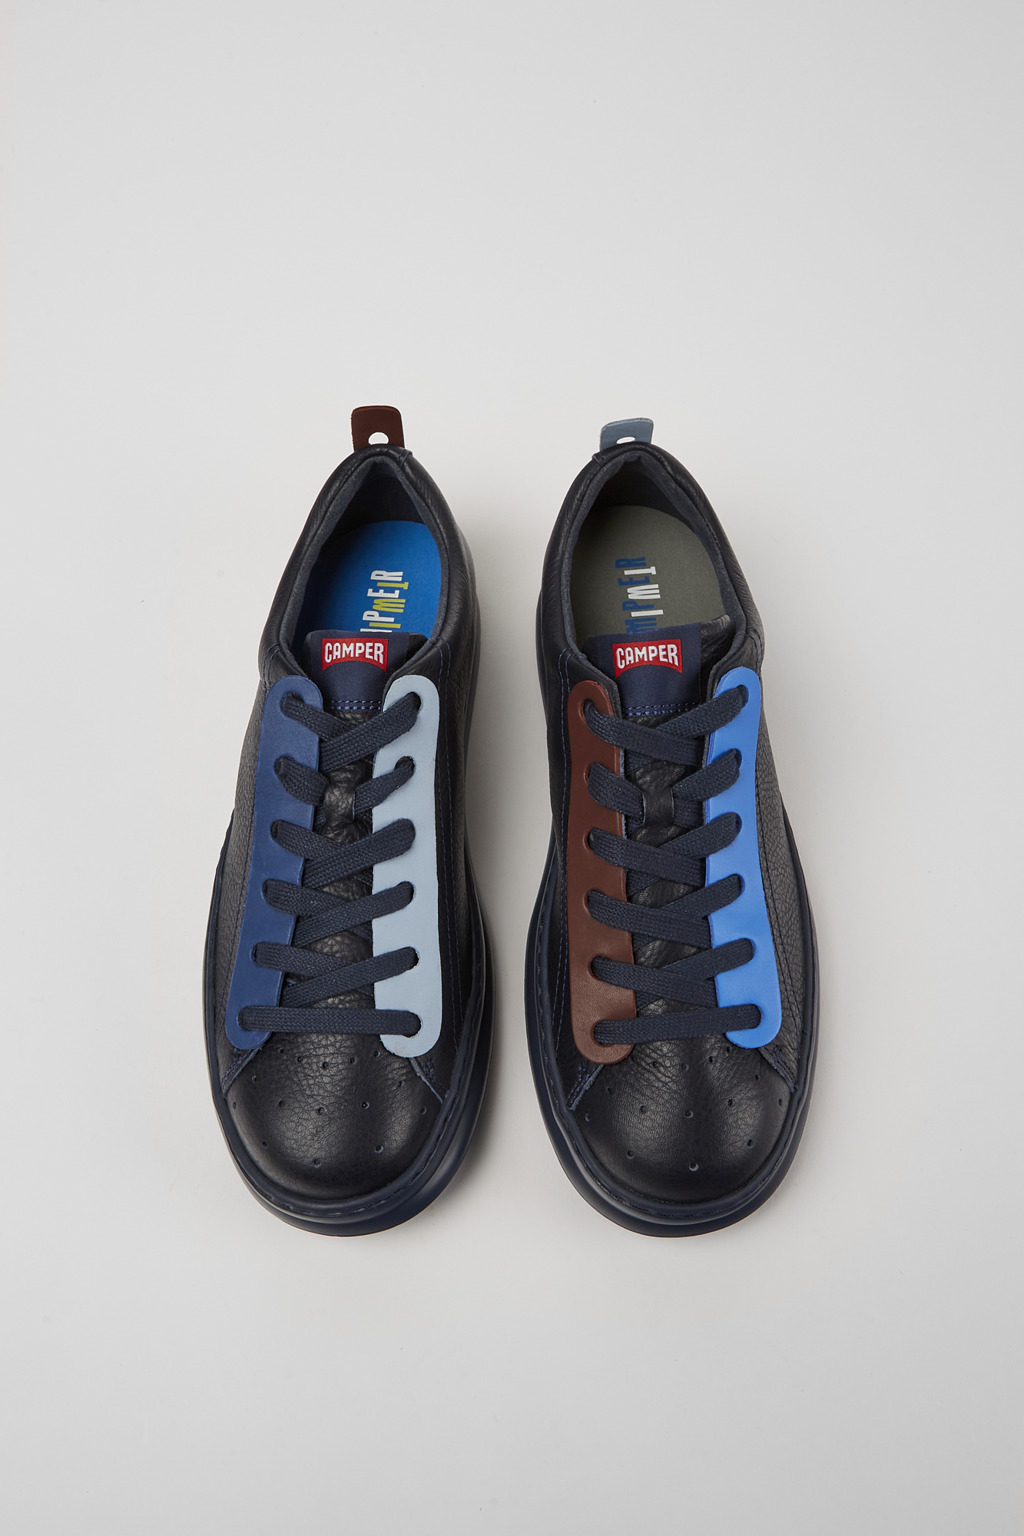 Twins Blue Sneakers for Men - Fall/Winter collection - Camper USA